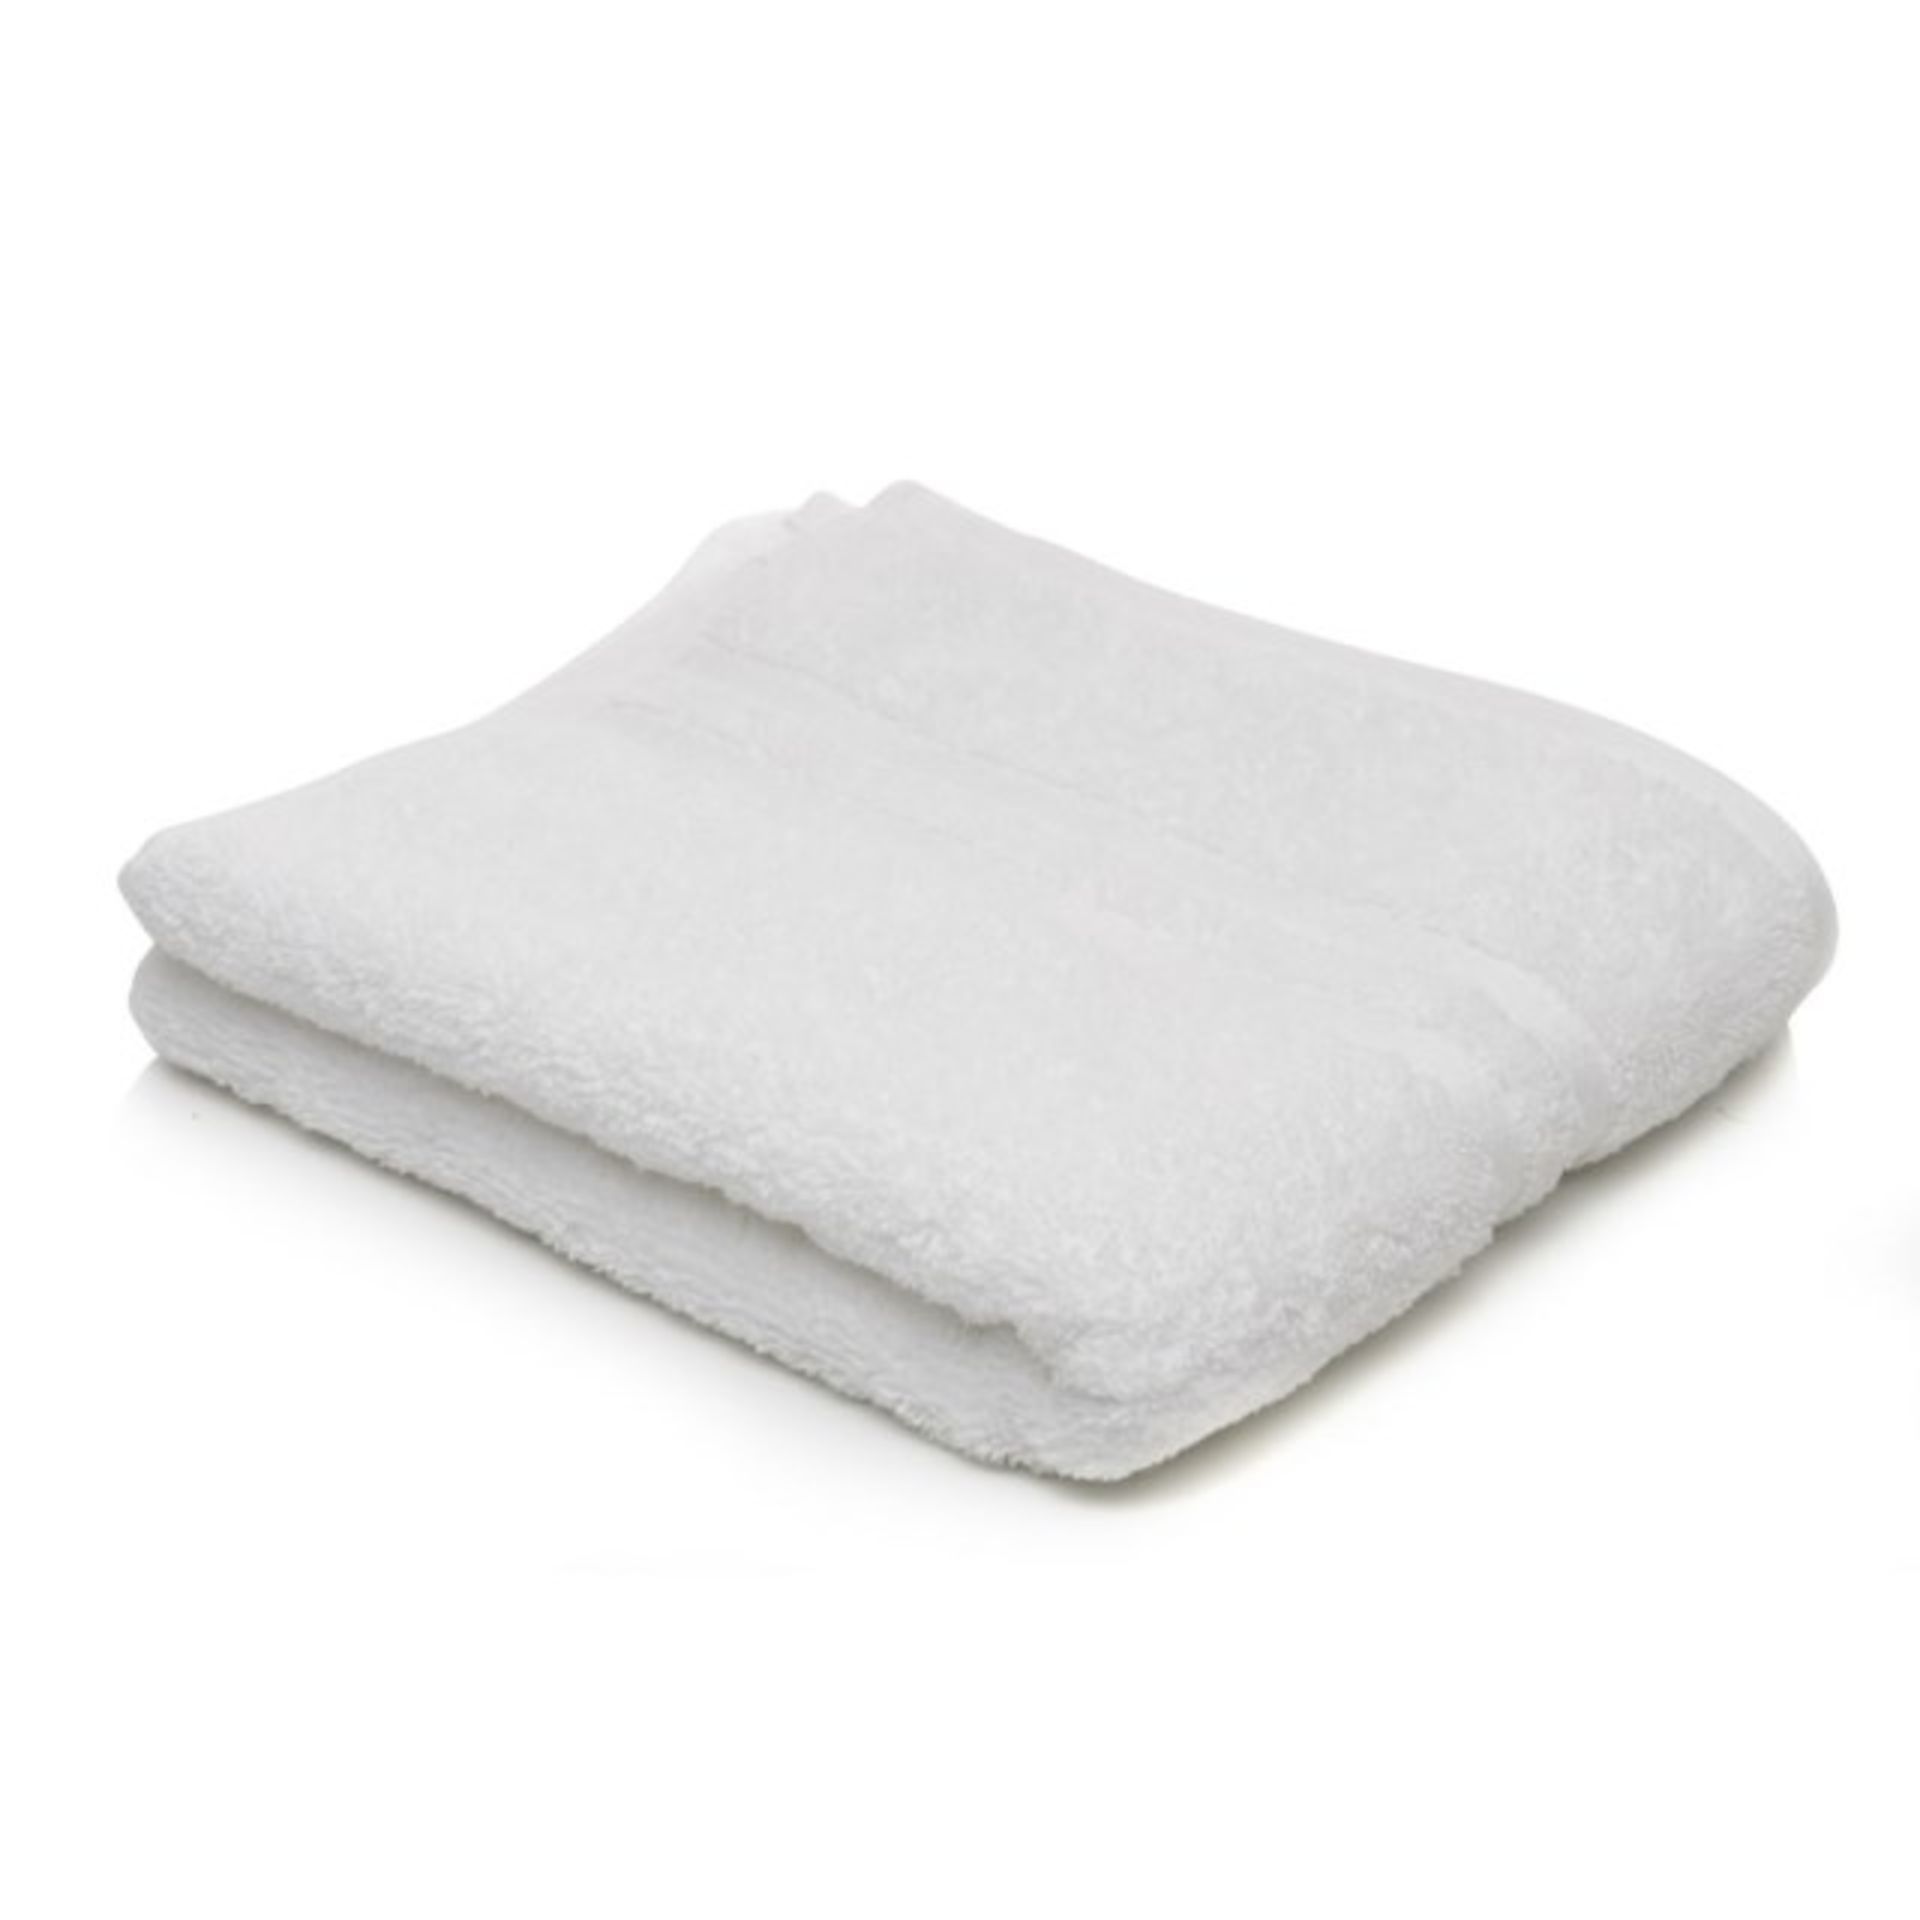 V  Grade A 70 x 140cm White Cotton Hotel Bath Towel RRP £19.99 X  6  Bid price to be multiplied by